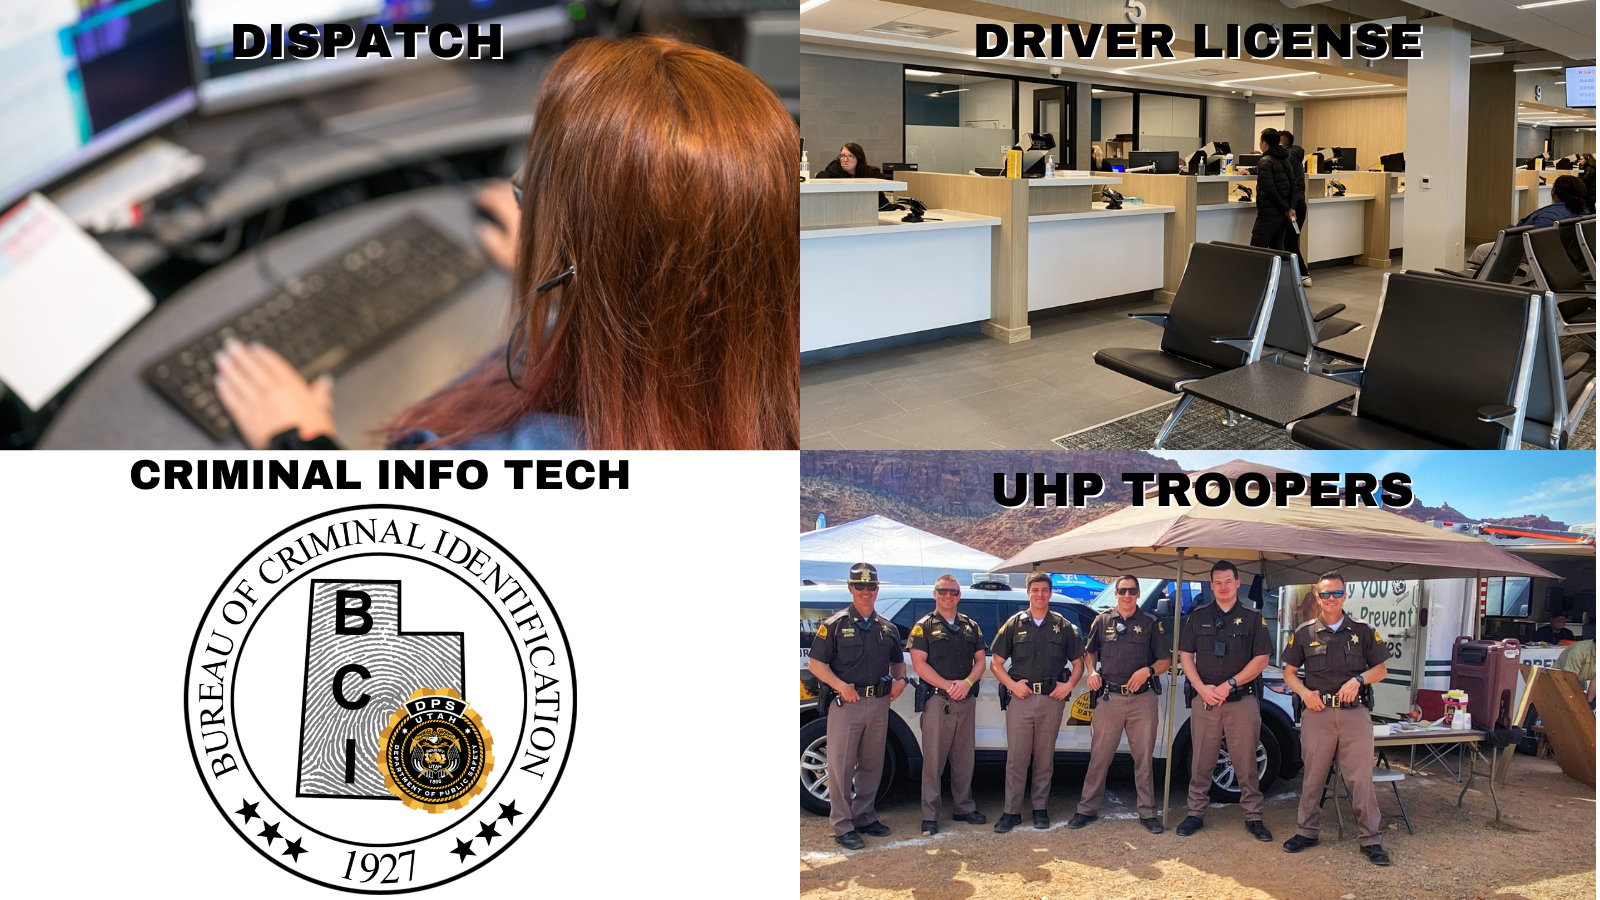 Picture of dispatcher, driver license office, BCI logo and UHP Troopers